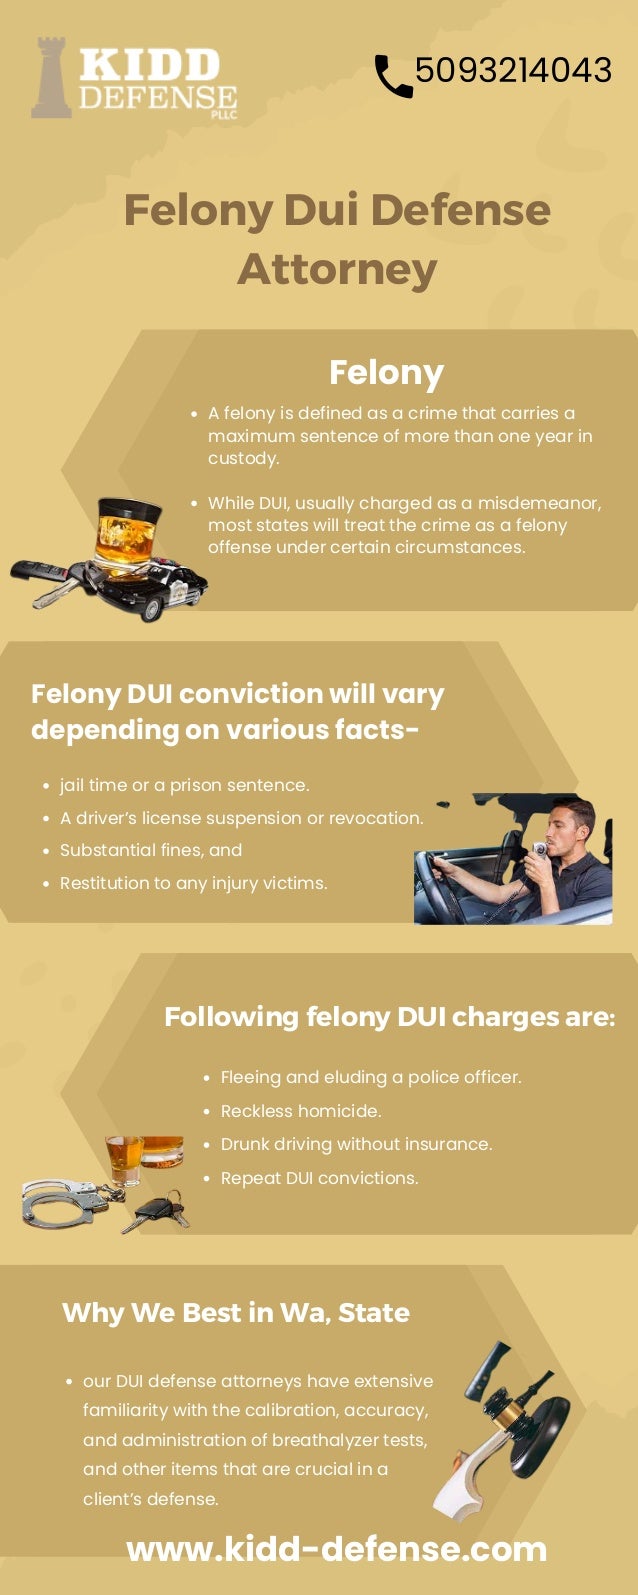 Felony Dui Defense

Attorney
A felony is defined as a crime that carries a

maximum sentence of more than one year in

custody.
While DUI, usually charged as a misdemeanor,

most states will treat the crime as a felony

offense under certain circumstances.
Fleeing and eluding a police officer.
Reckless homicide.
Drunk driving without insurance.
Repeat DUI convictions.
jail time or a prison sentence.
A driver’s license suspension or revocation.
Substantial fines, and
Restitution to any injury victims.
our DUI defense attorneys have extensive

familiarity with the calibration, accuracy,

and administration of breathalyzer tests, 

and other items that are crucial in a

client’s defense.
Following felony DUI charges are:
Felony DUI conviction will vary

depending on various facts-
Why We Best in Wa, State
5093214043


Felony
www.kidd-defense.com
 